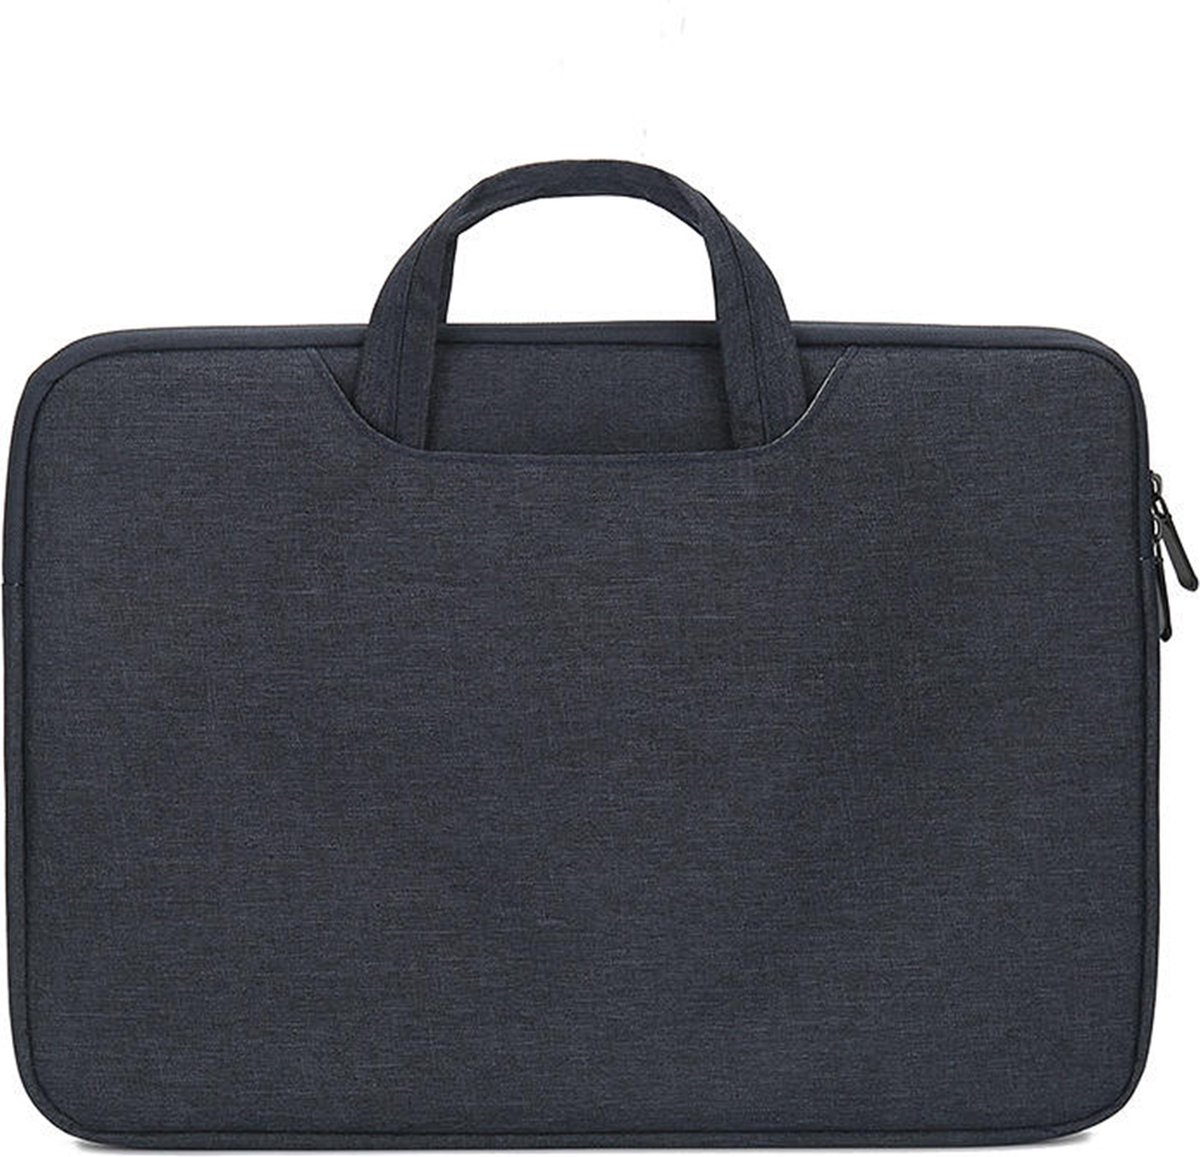 Case2go - Laptophoes 13 inch - Laptop Sleeve - Donker Blauw